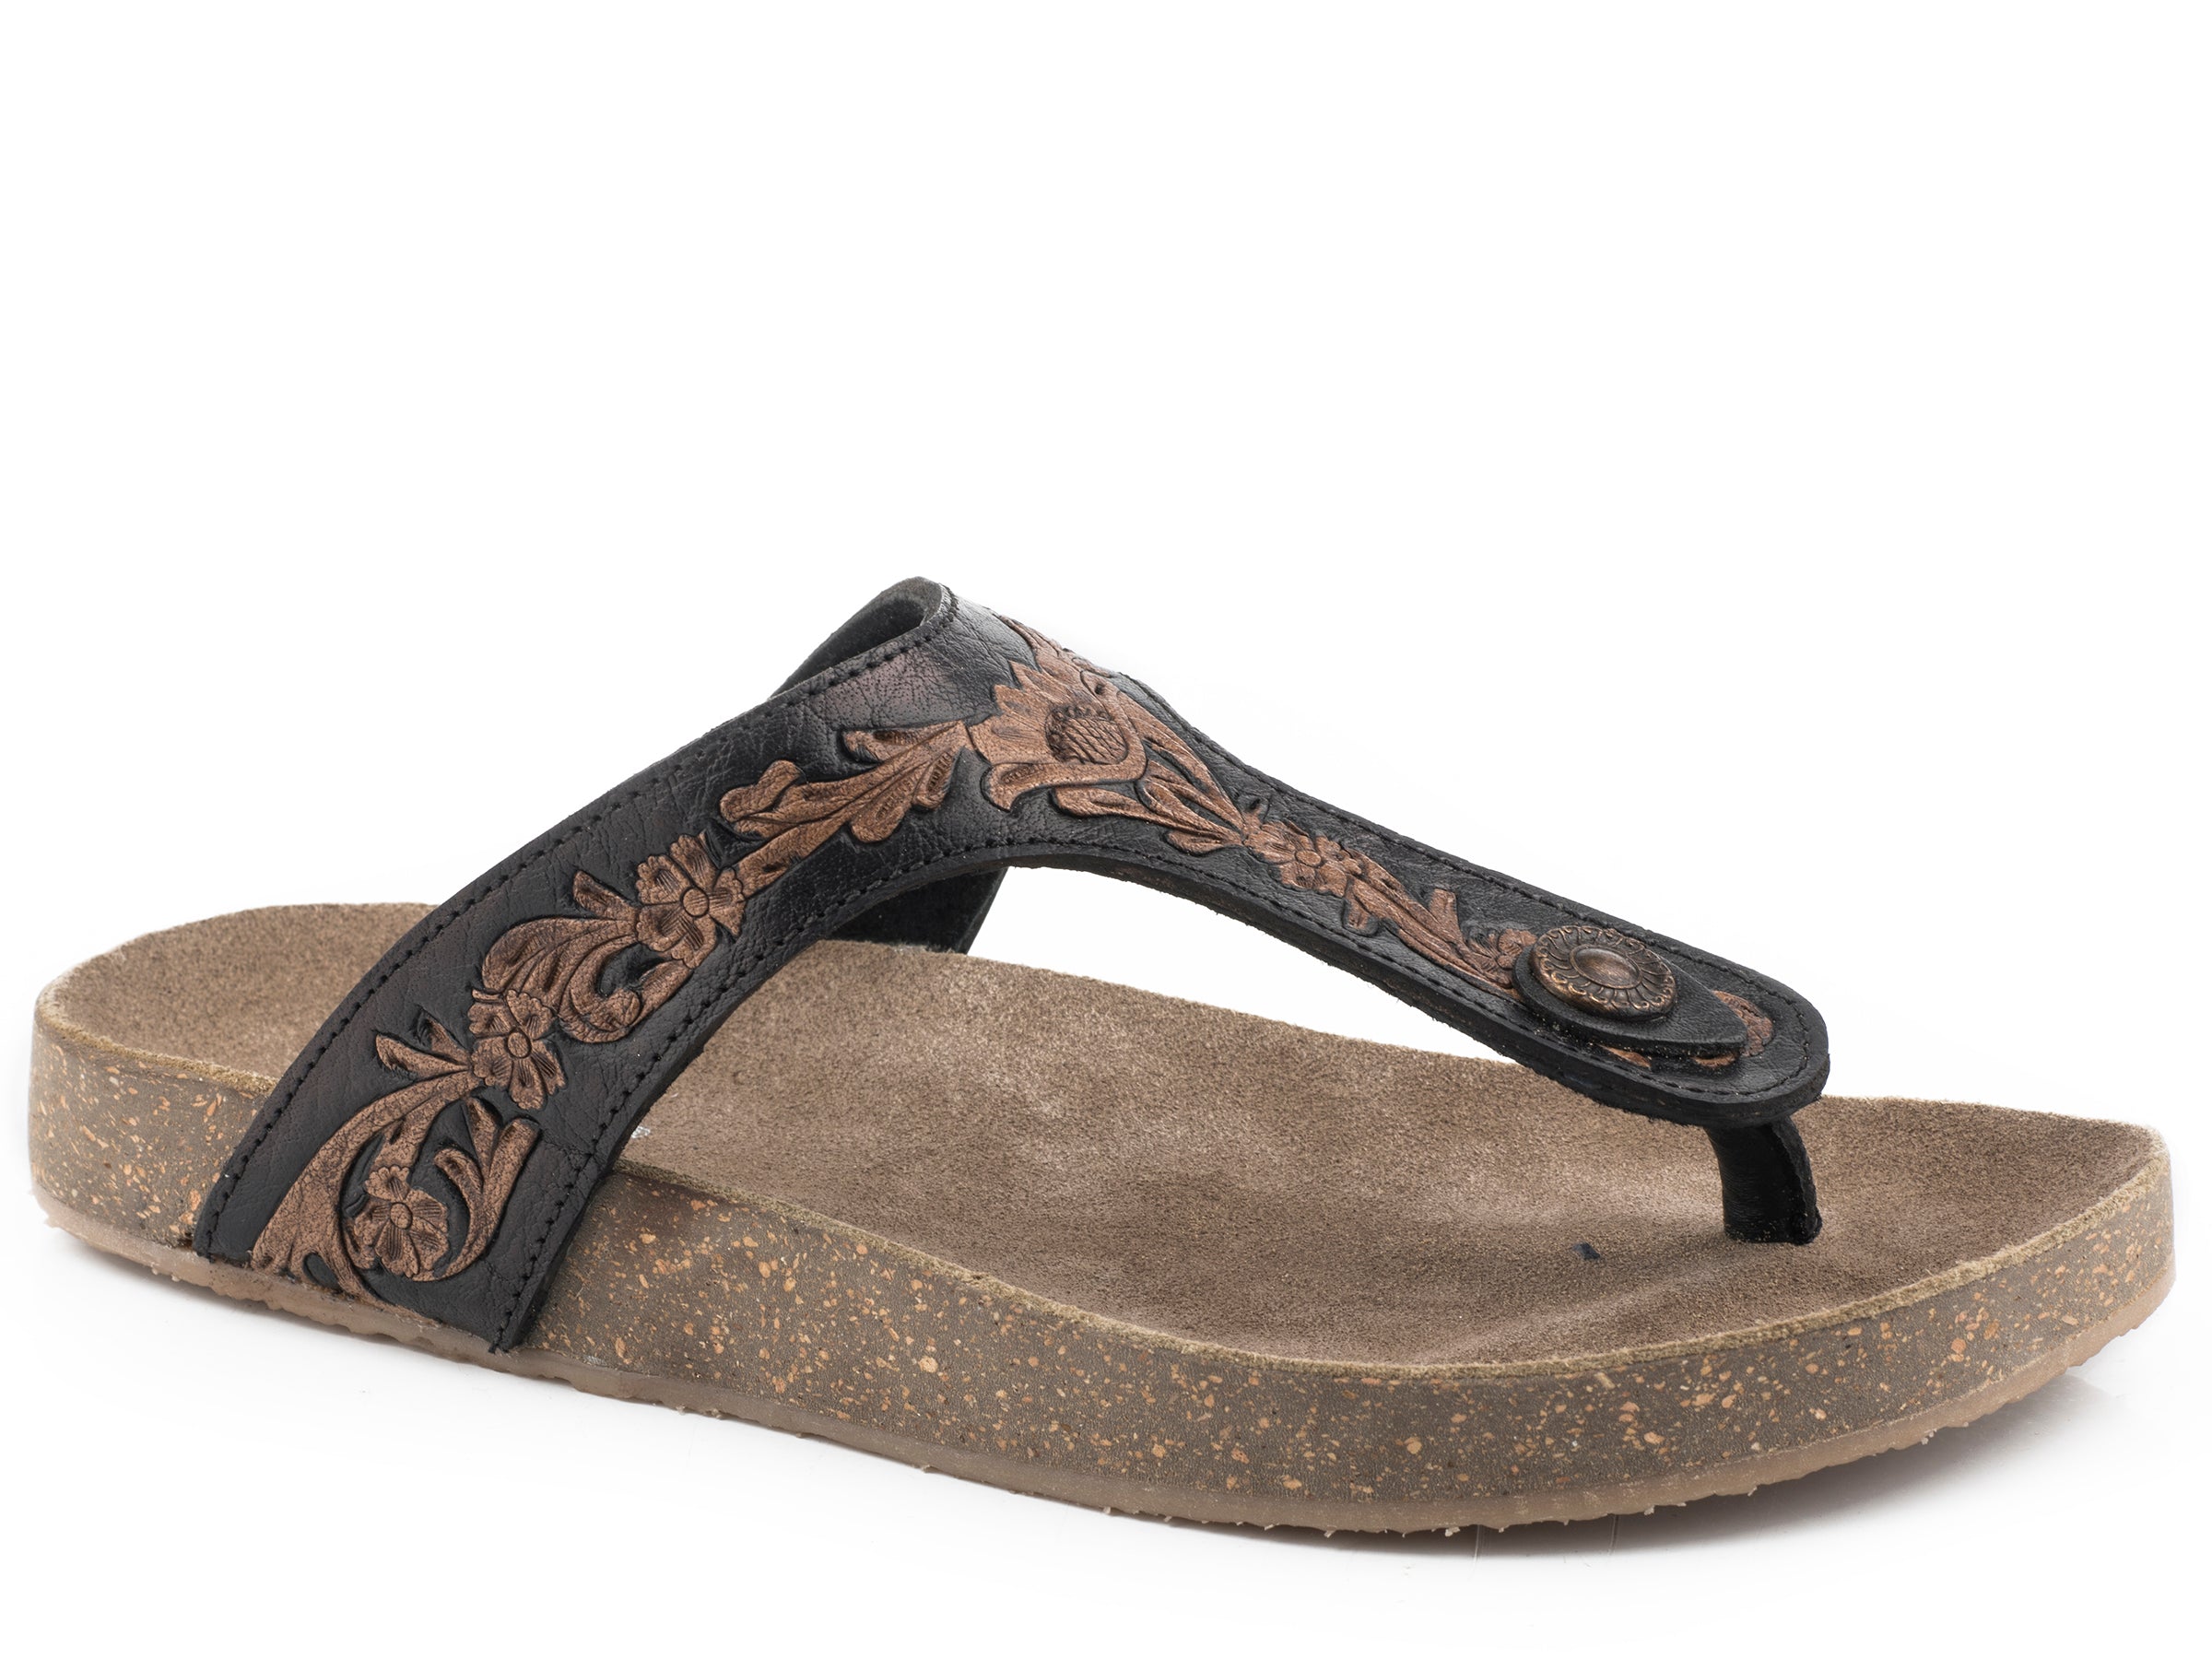 Roper Womens Black With Brown Tooled Flowers